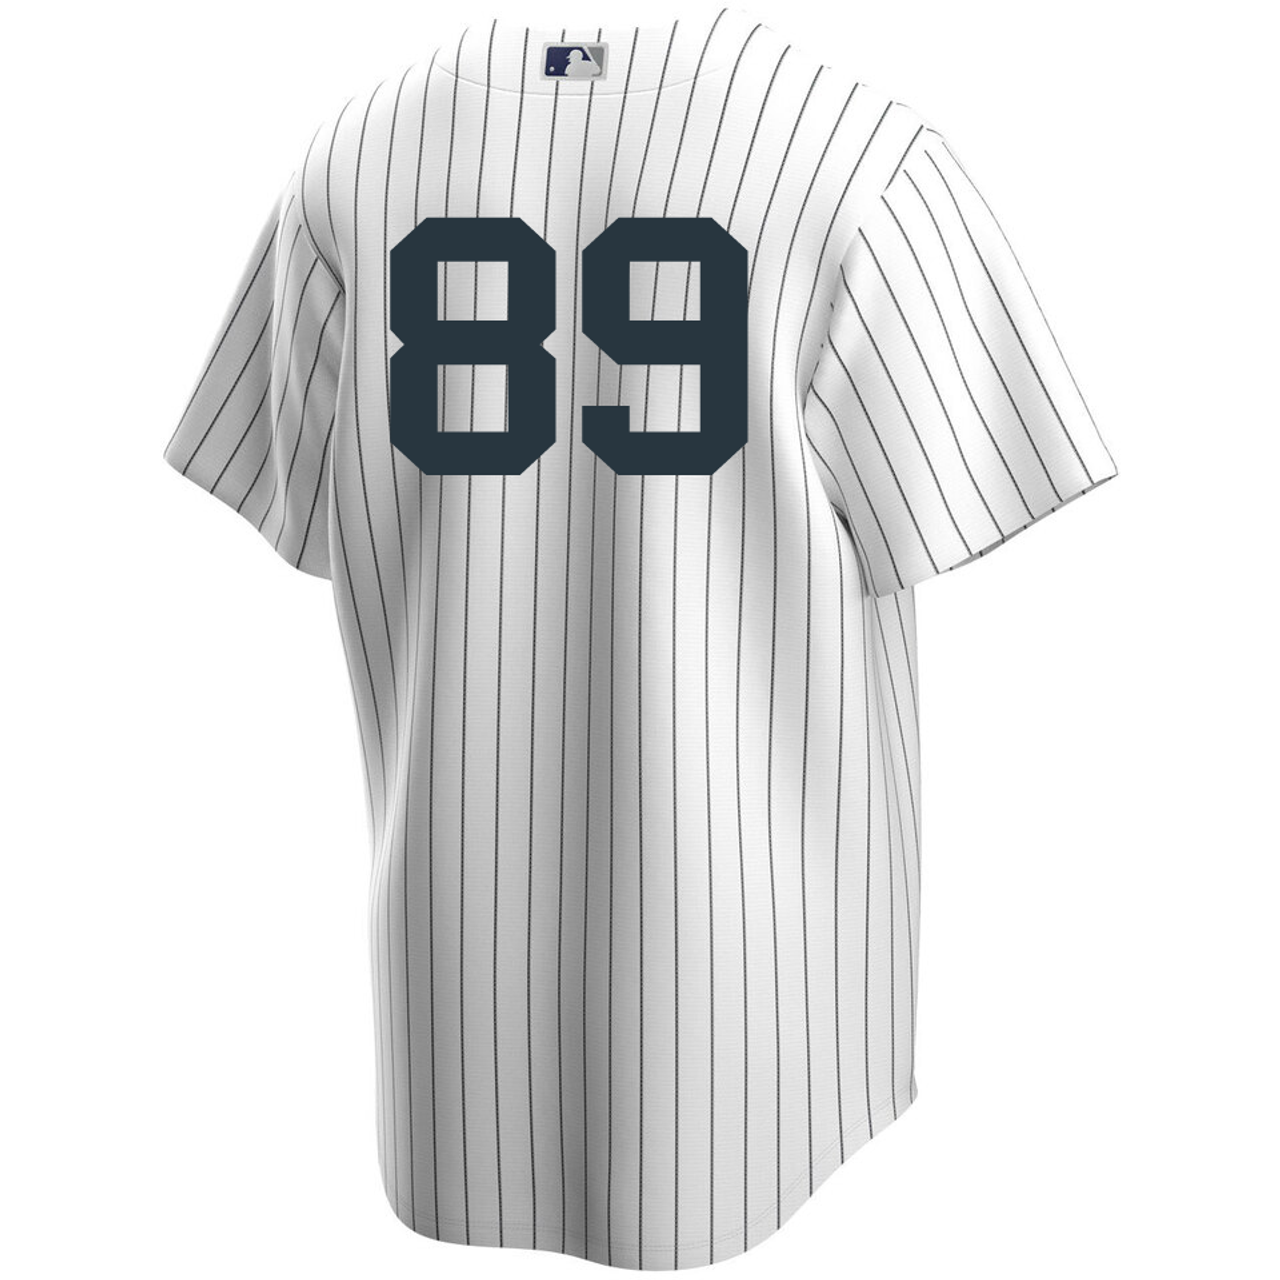 Thurman Munson Youth No Name Road Jersey - NY Yankees Number Only Kids  Jersey